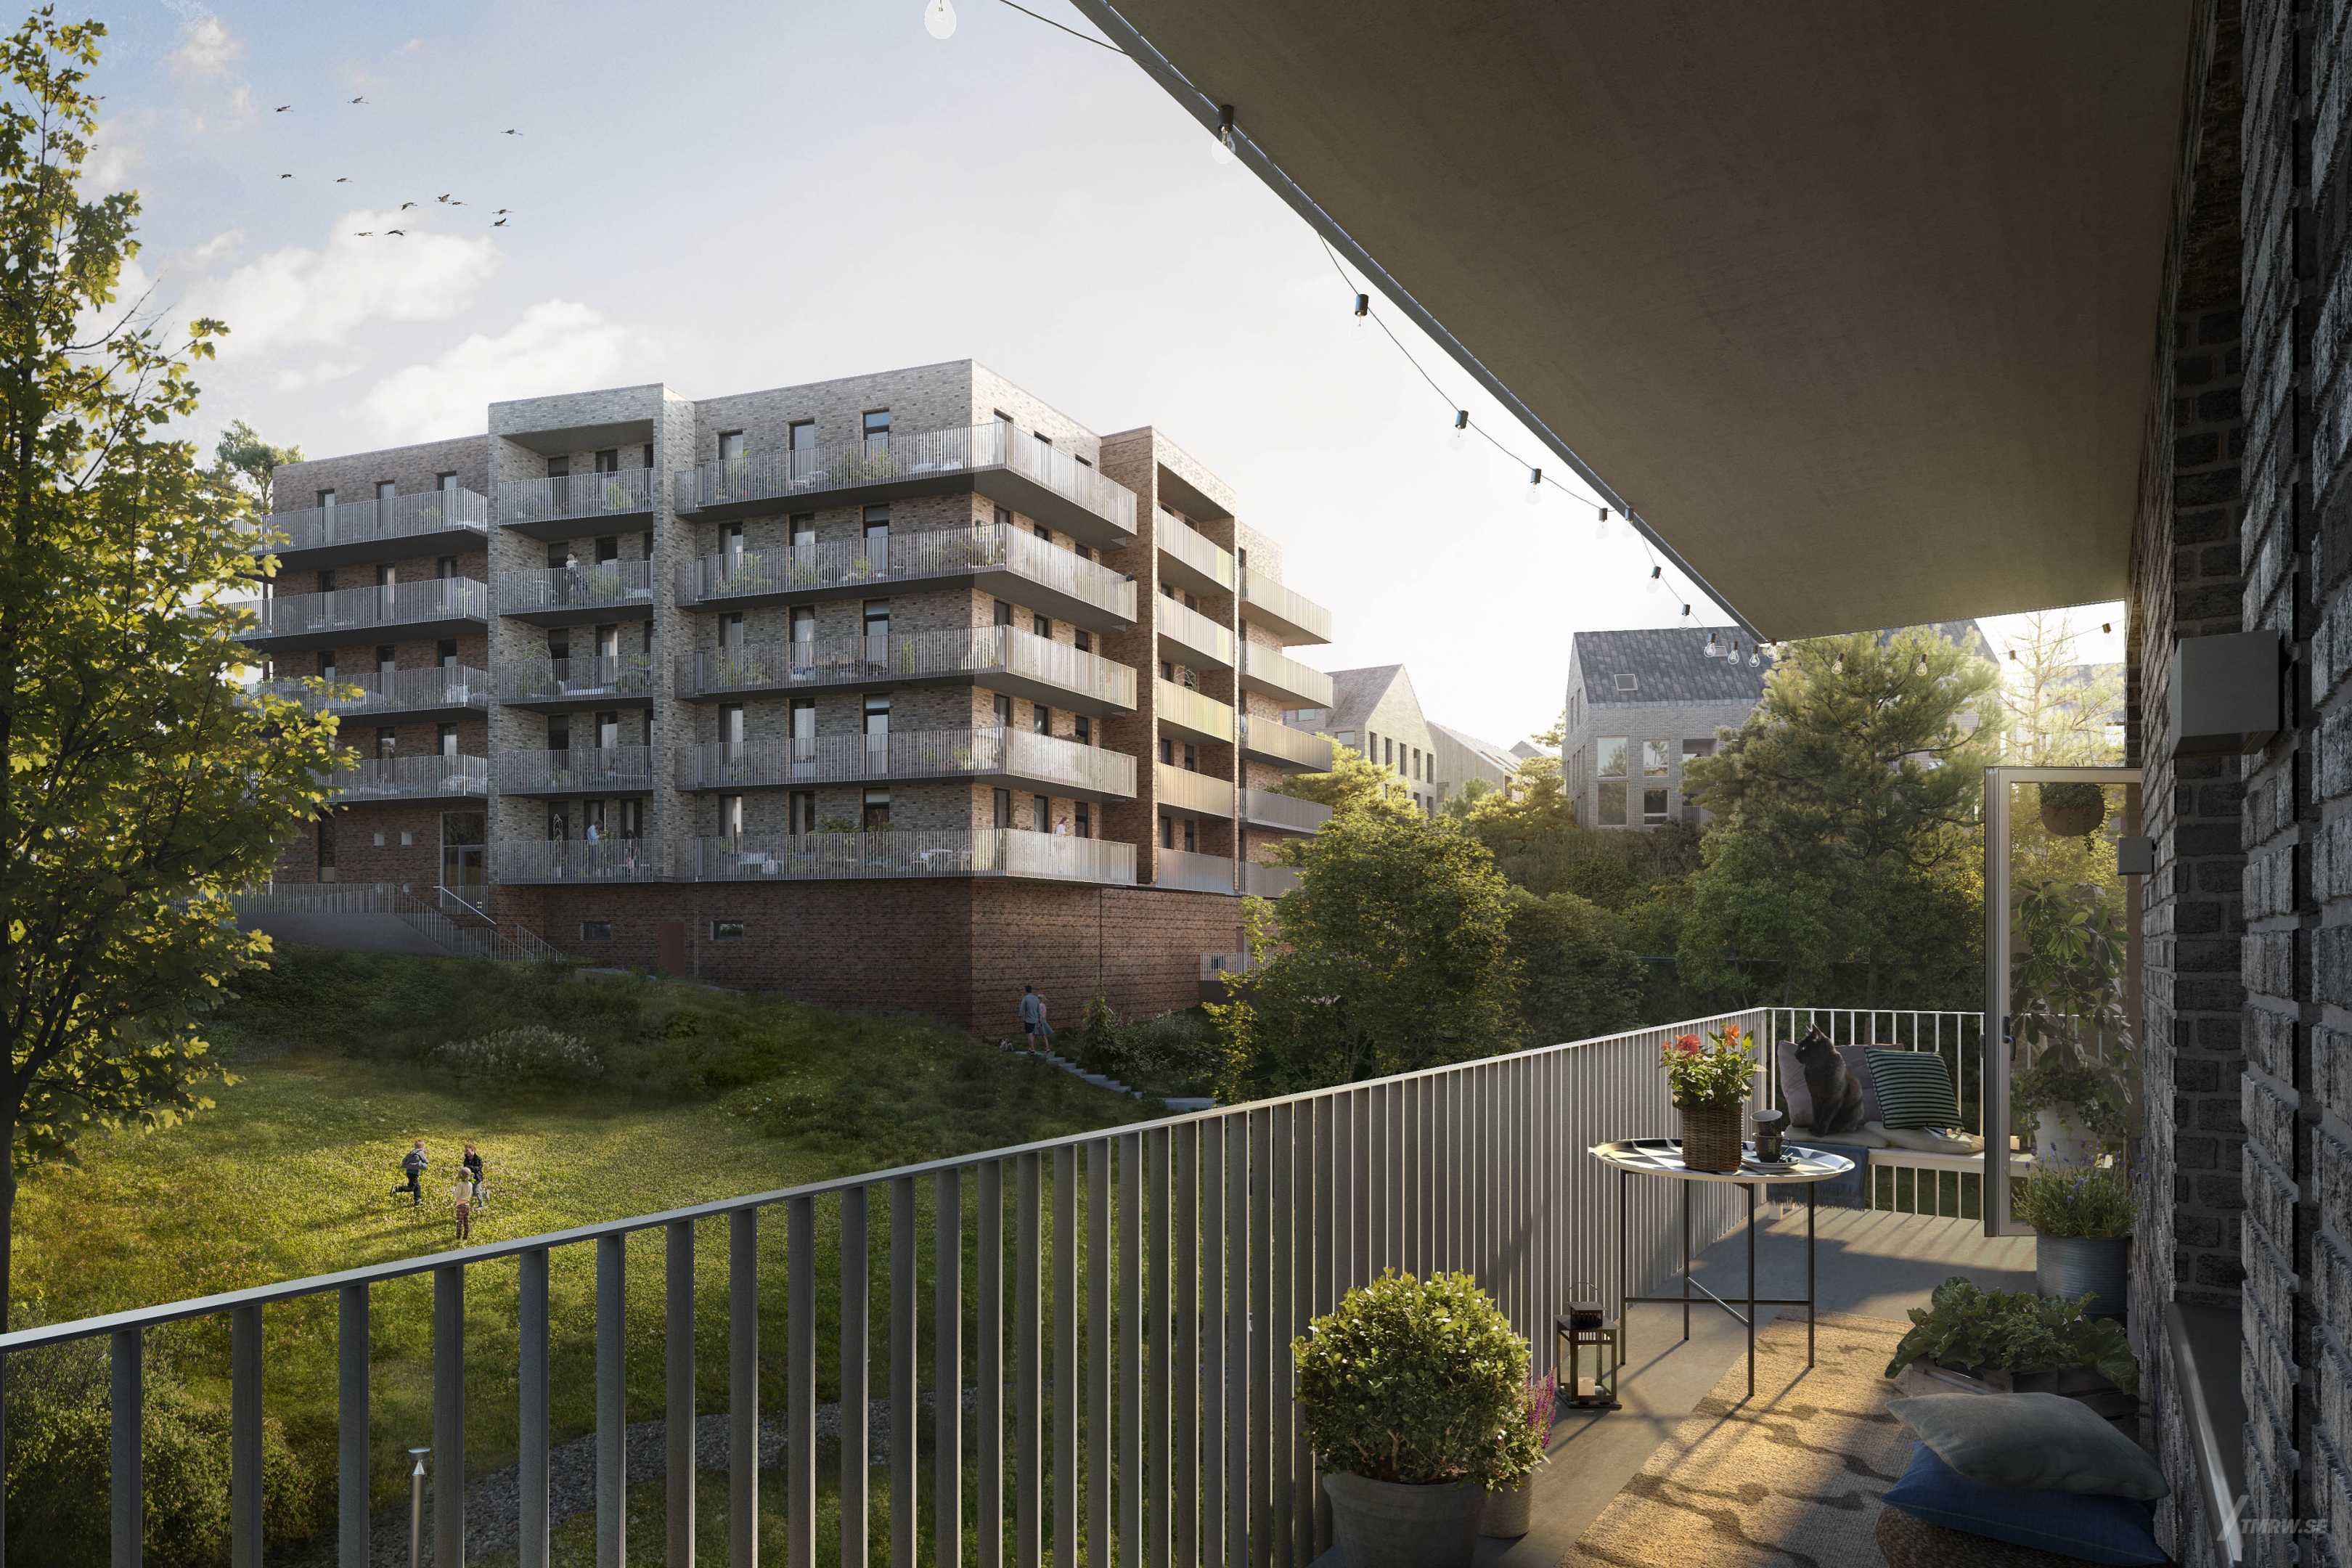 Architectural visualization of Esplanaden for HSB a apartment balcony in day light form an interior view.